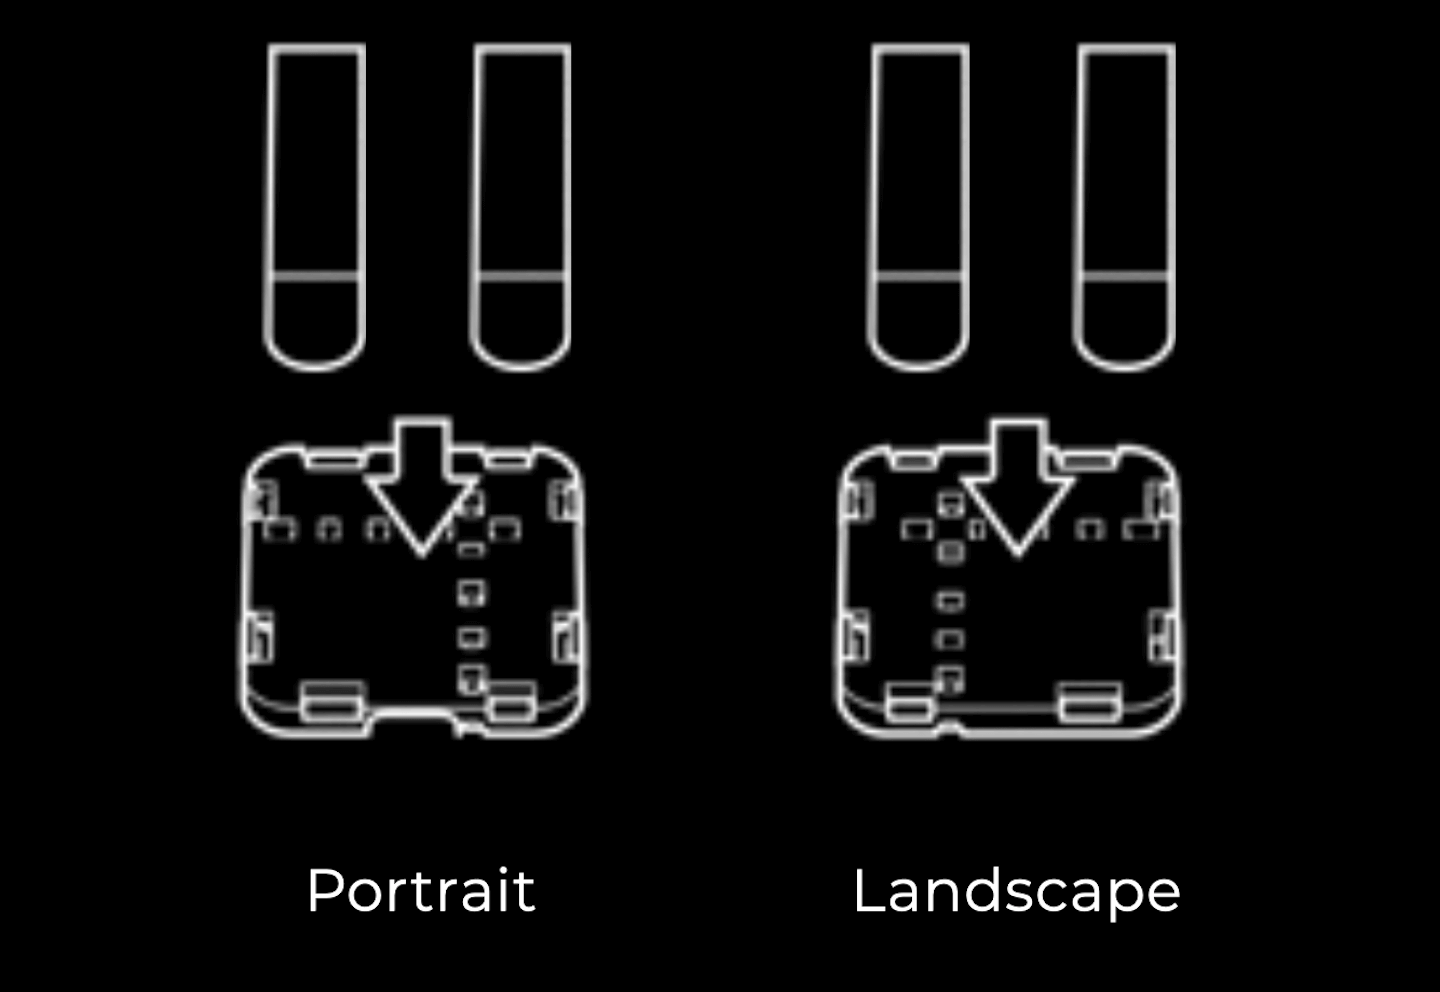 Illustration of Universal Stand tablet connector plate with adhesives lined up according to if the tablet wtll be displayed in portrait or landscape mode.